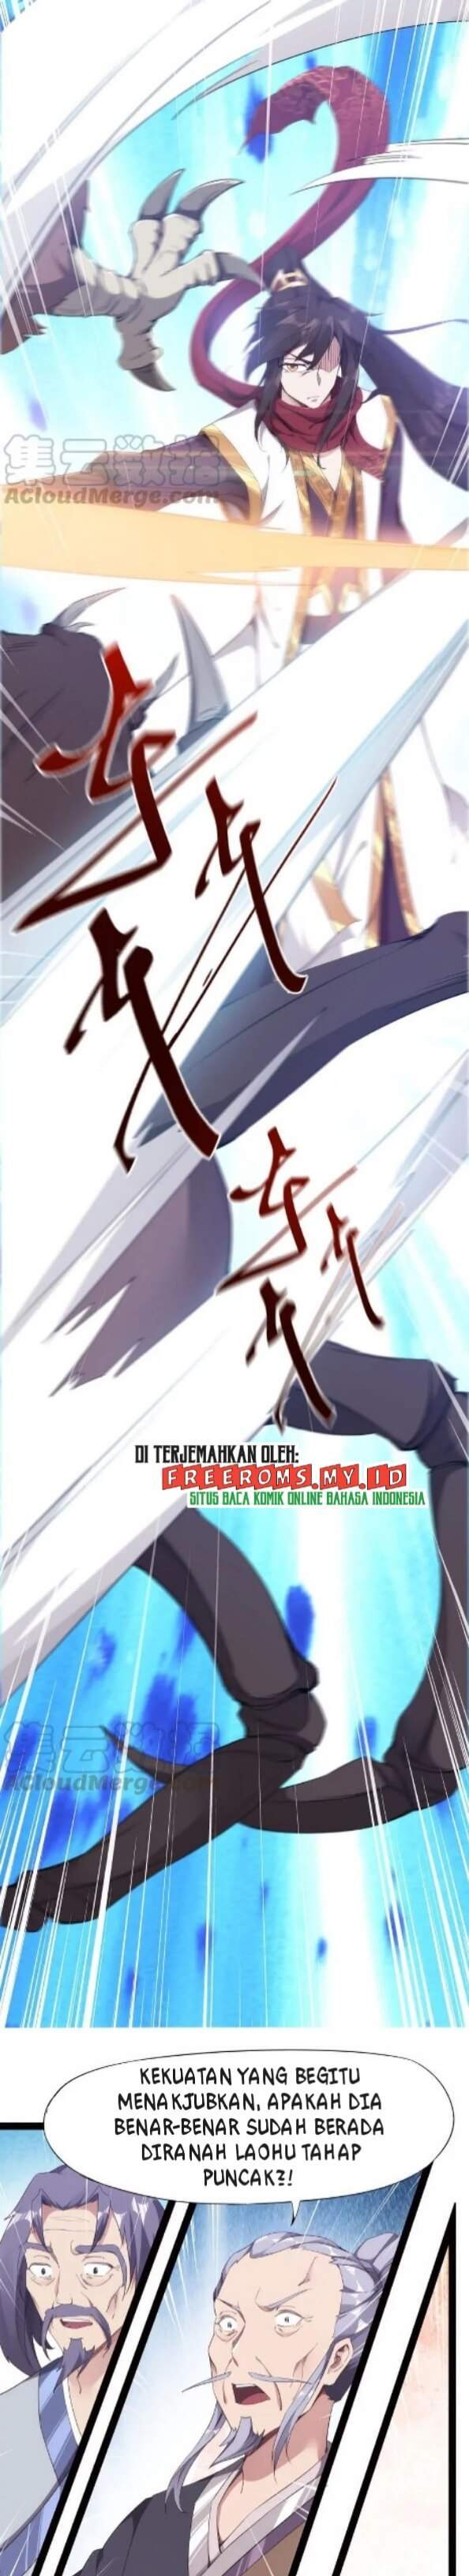 Path of the Sword Chapter 07